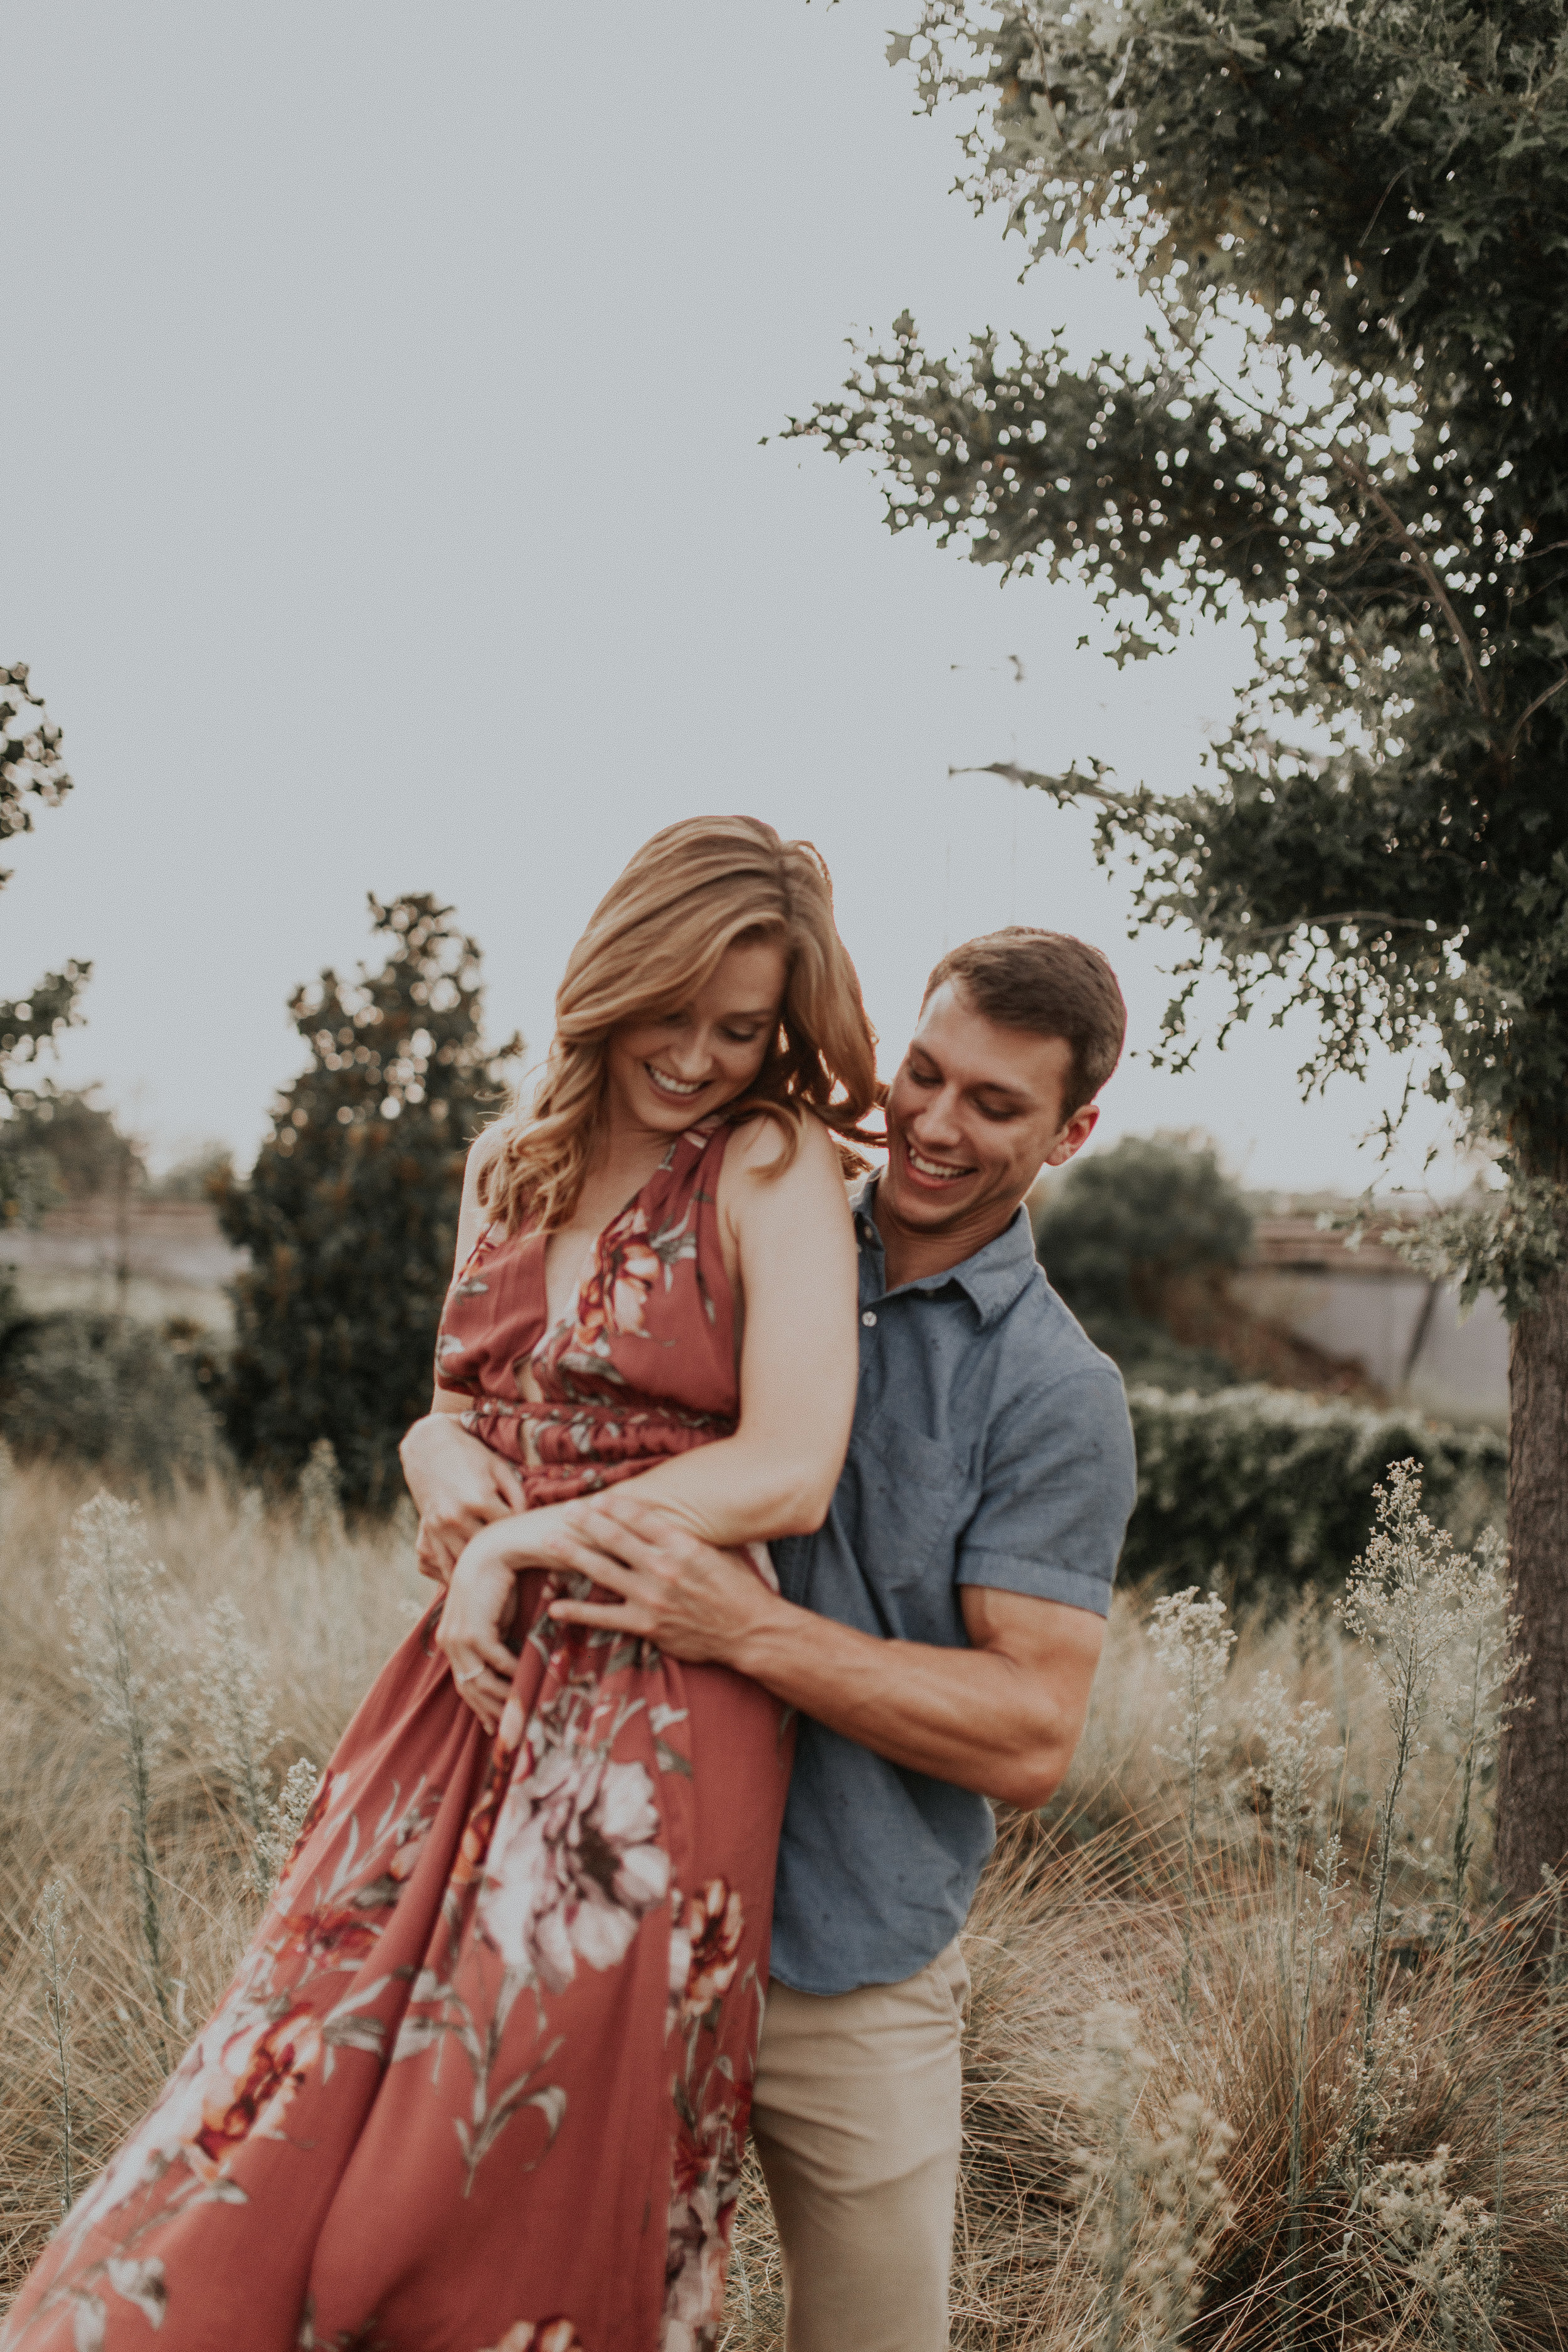 katie and brandon _ engagement session _ 08-5-1700210.jpg